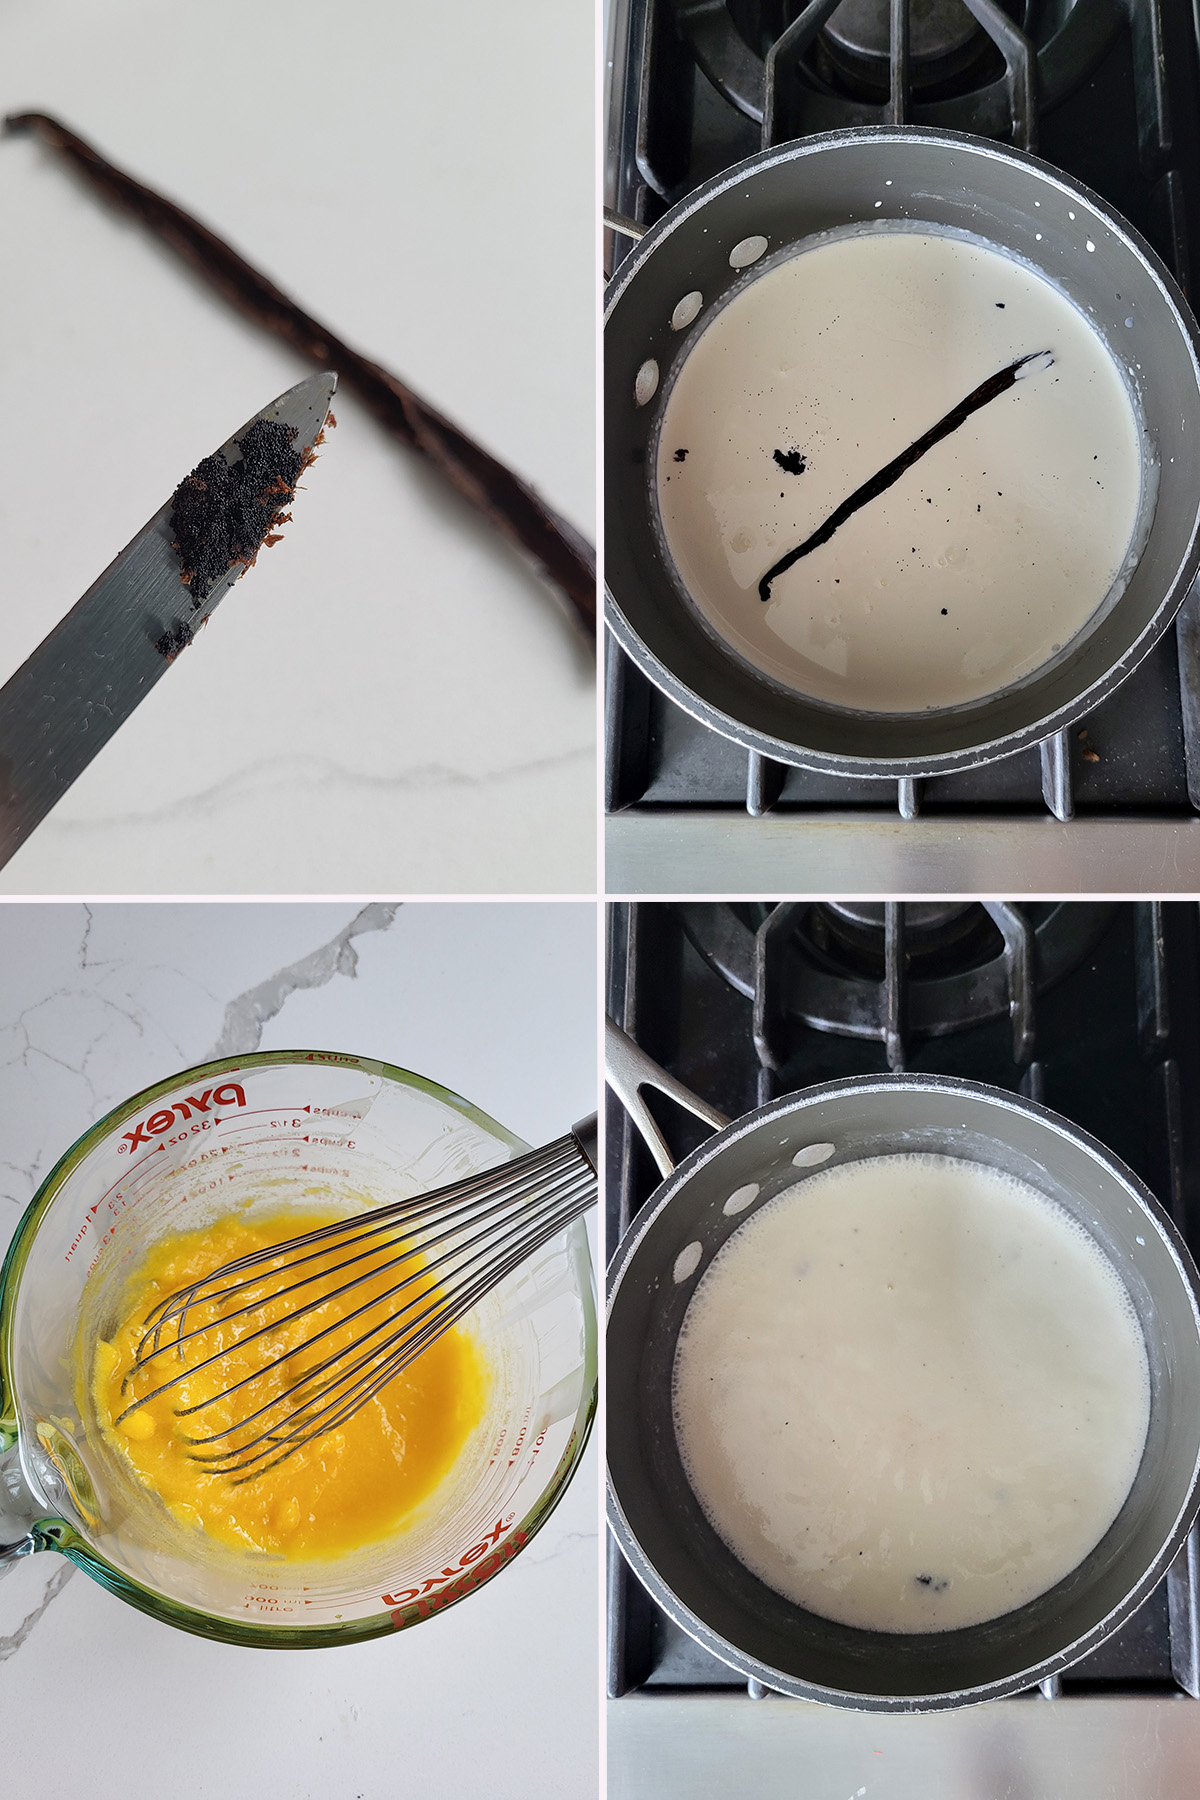 cream in a pot. Egg yolks in a bowl. Vanilla bean seeds on a knife.